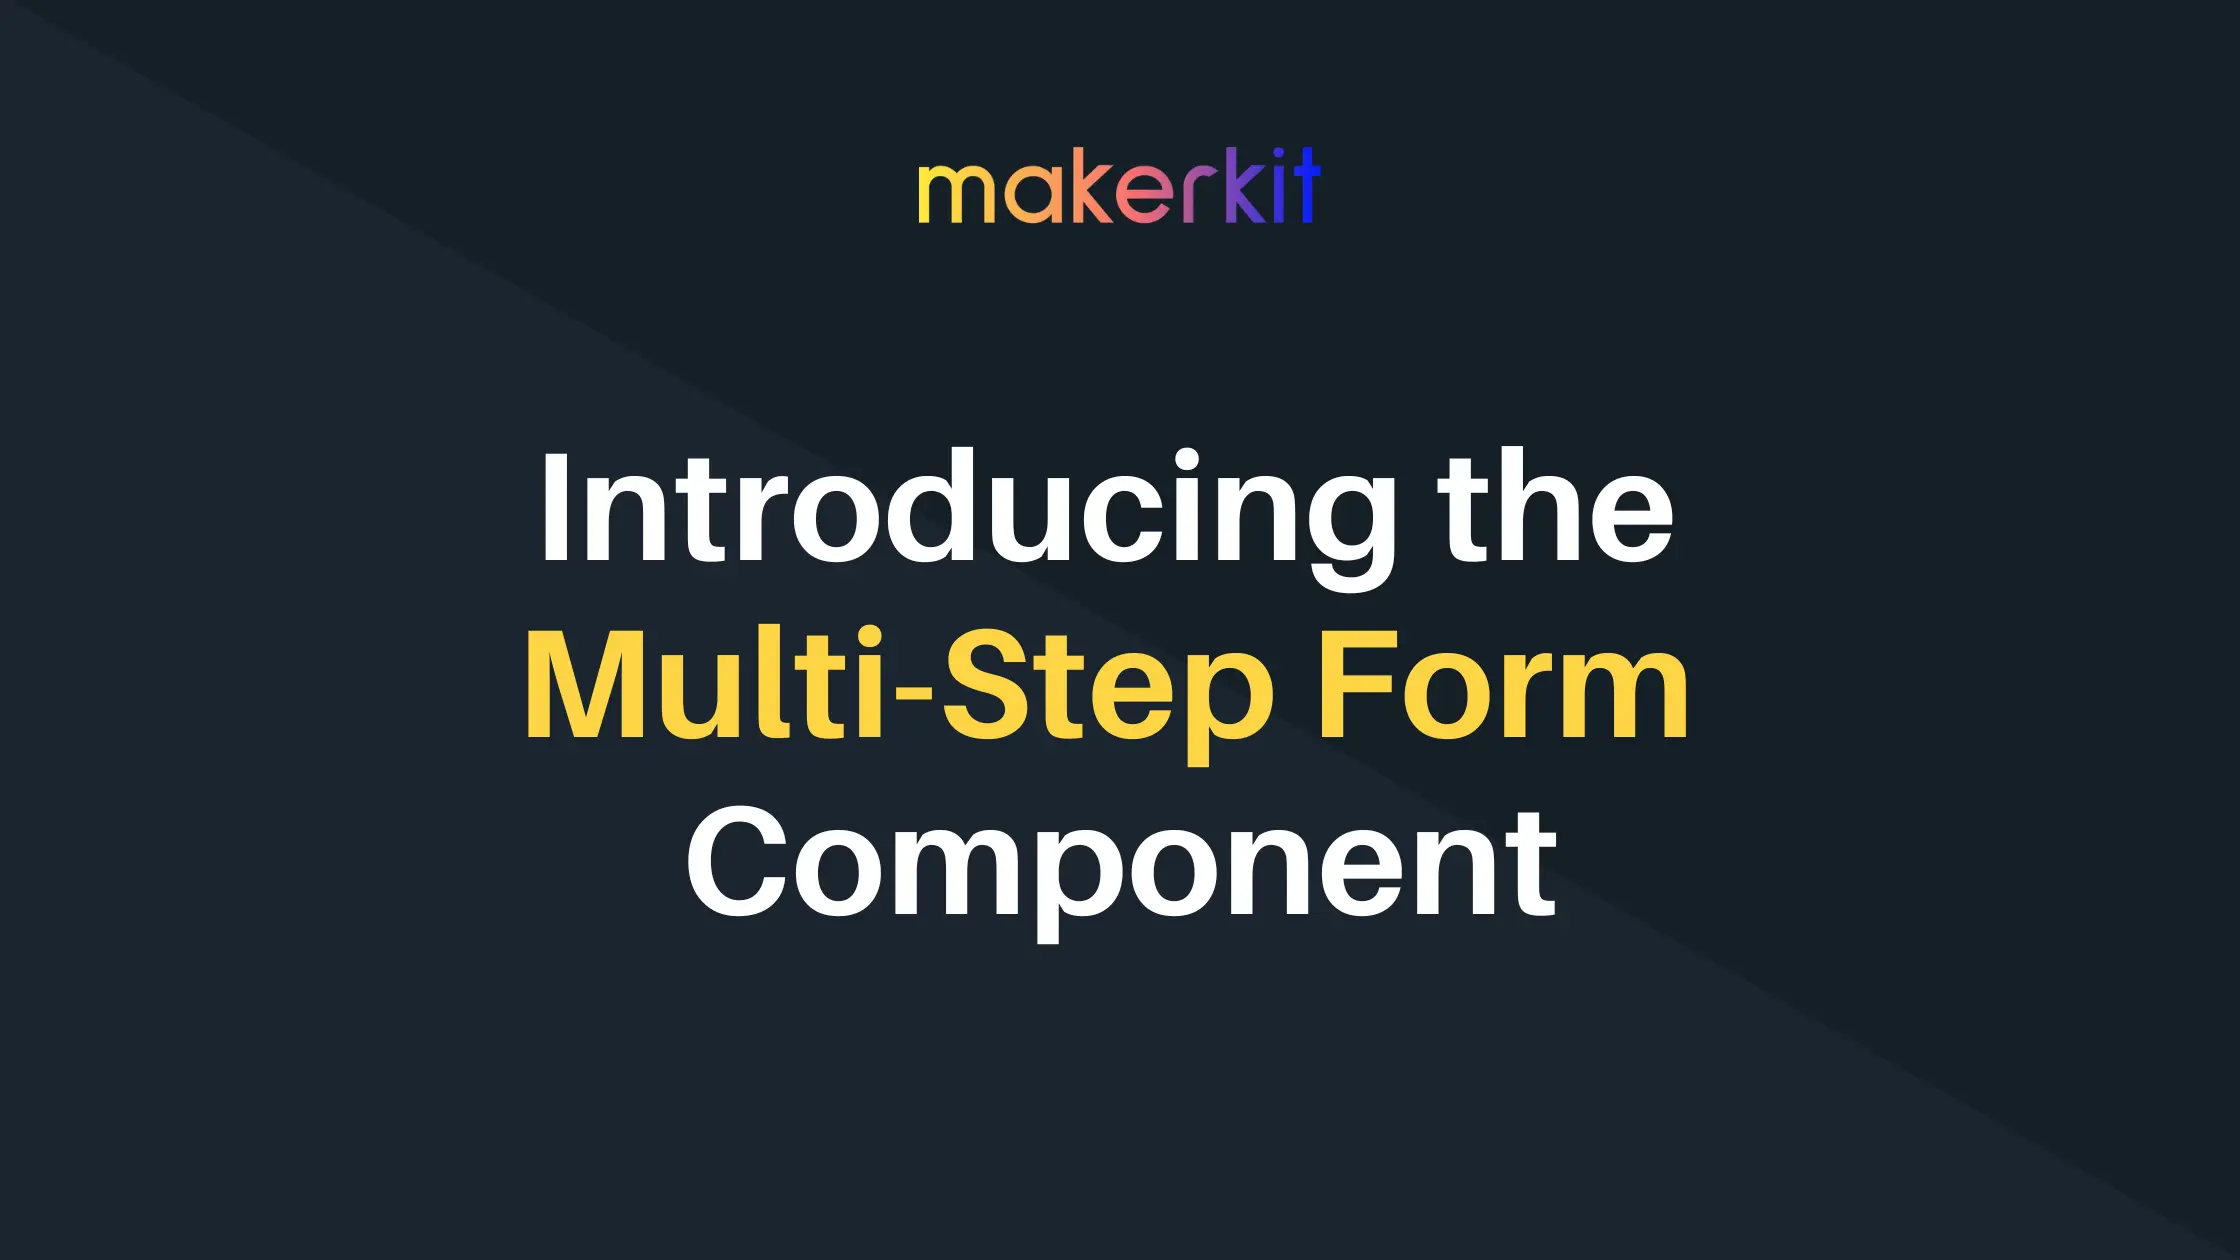 Cover Image for Introducing the Multi-Step Form Component for Makerkit